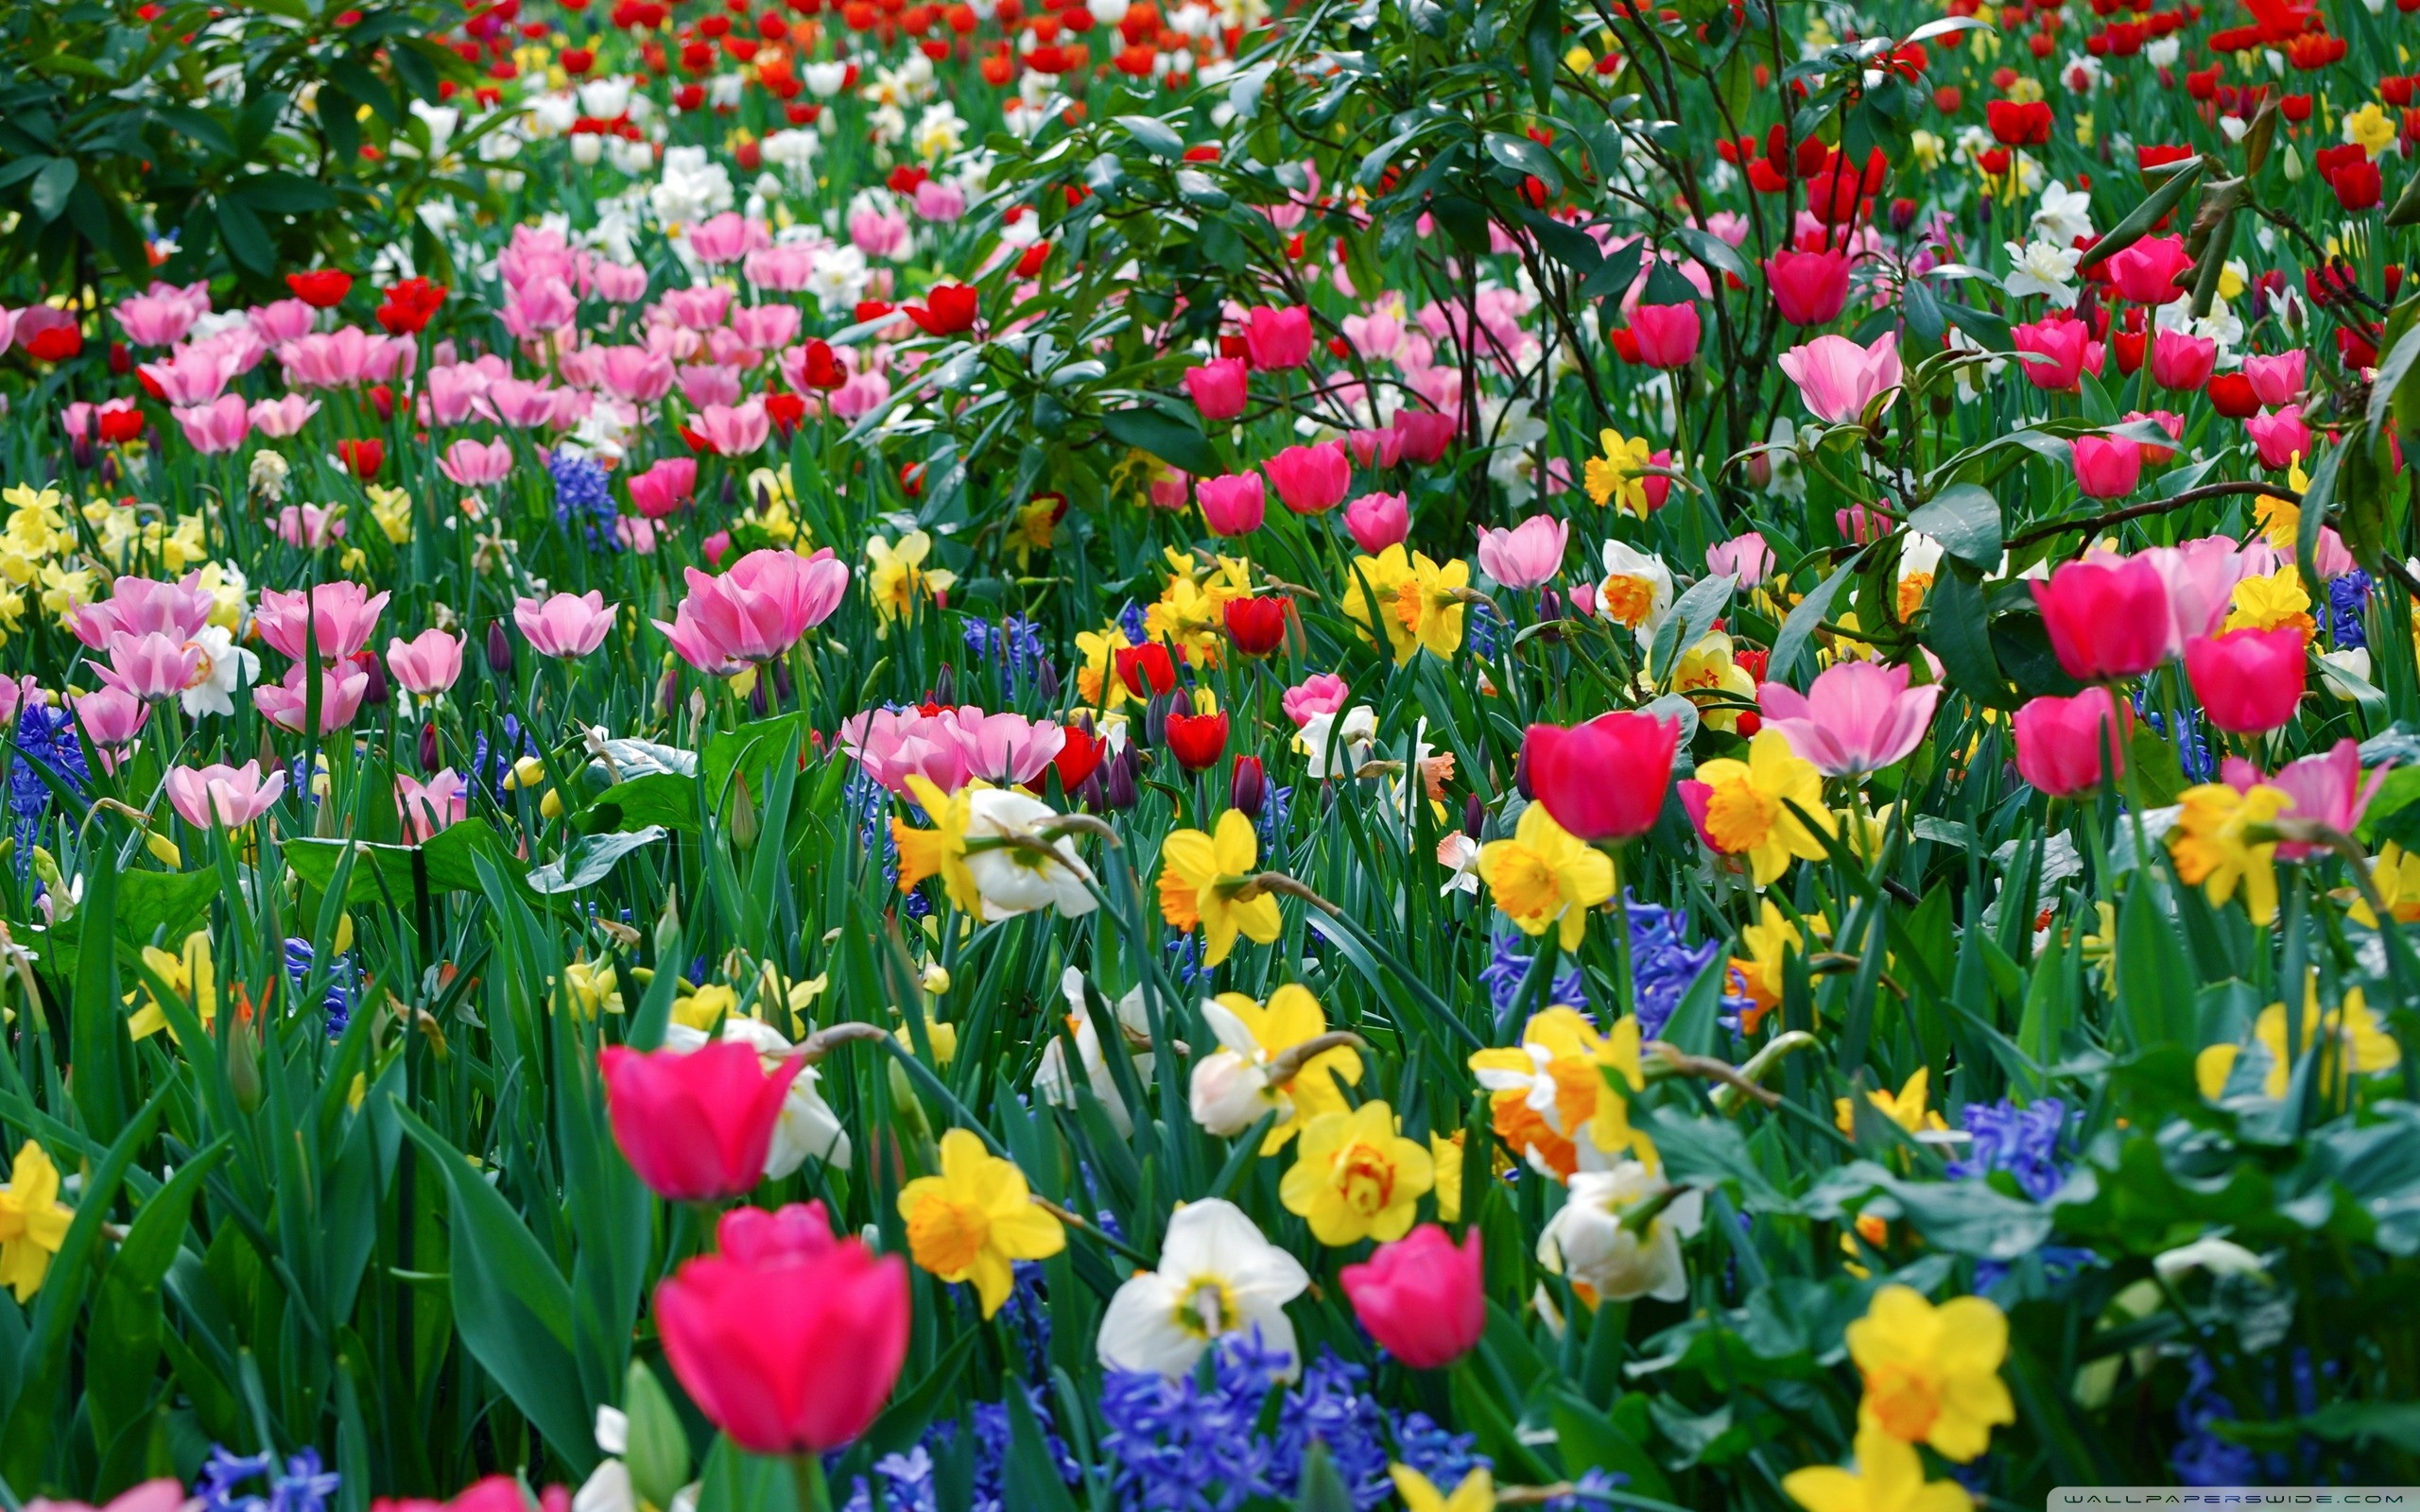 Planting Flowers this Spring | sustainablespu